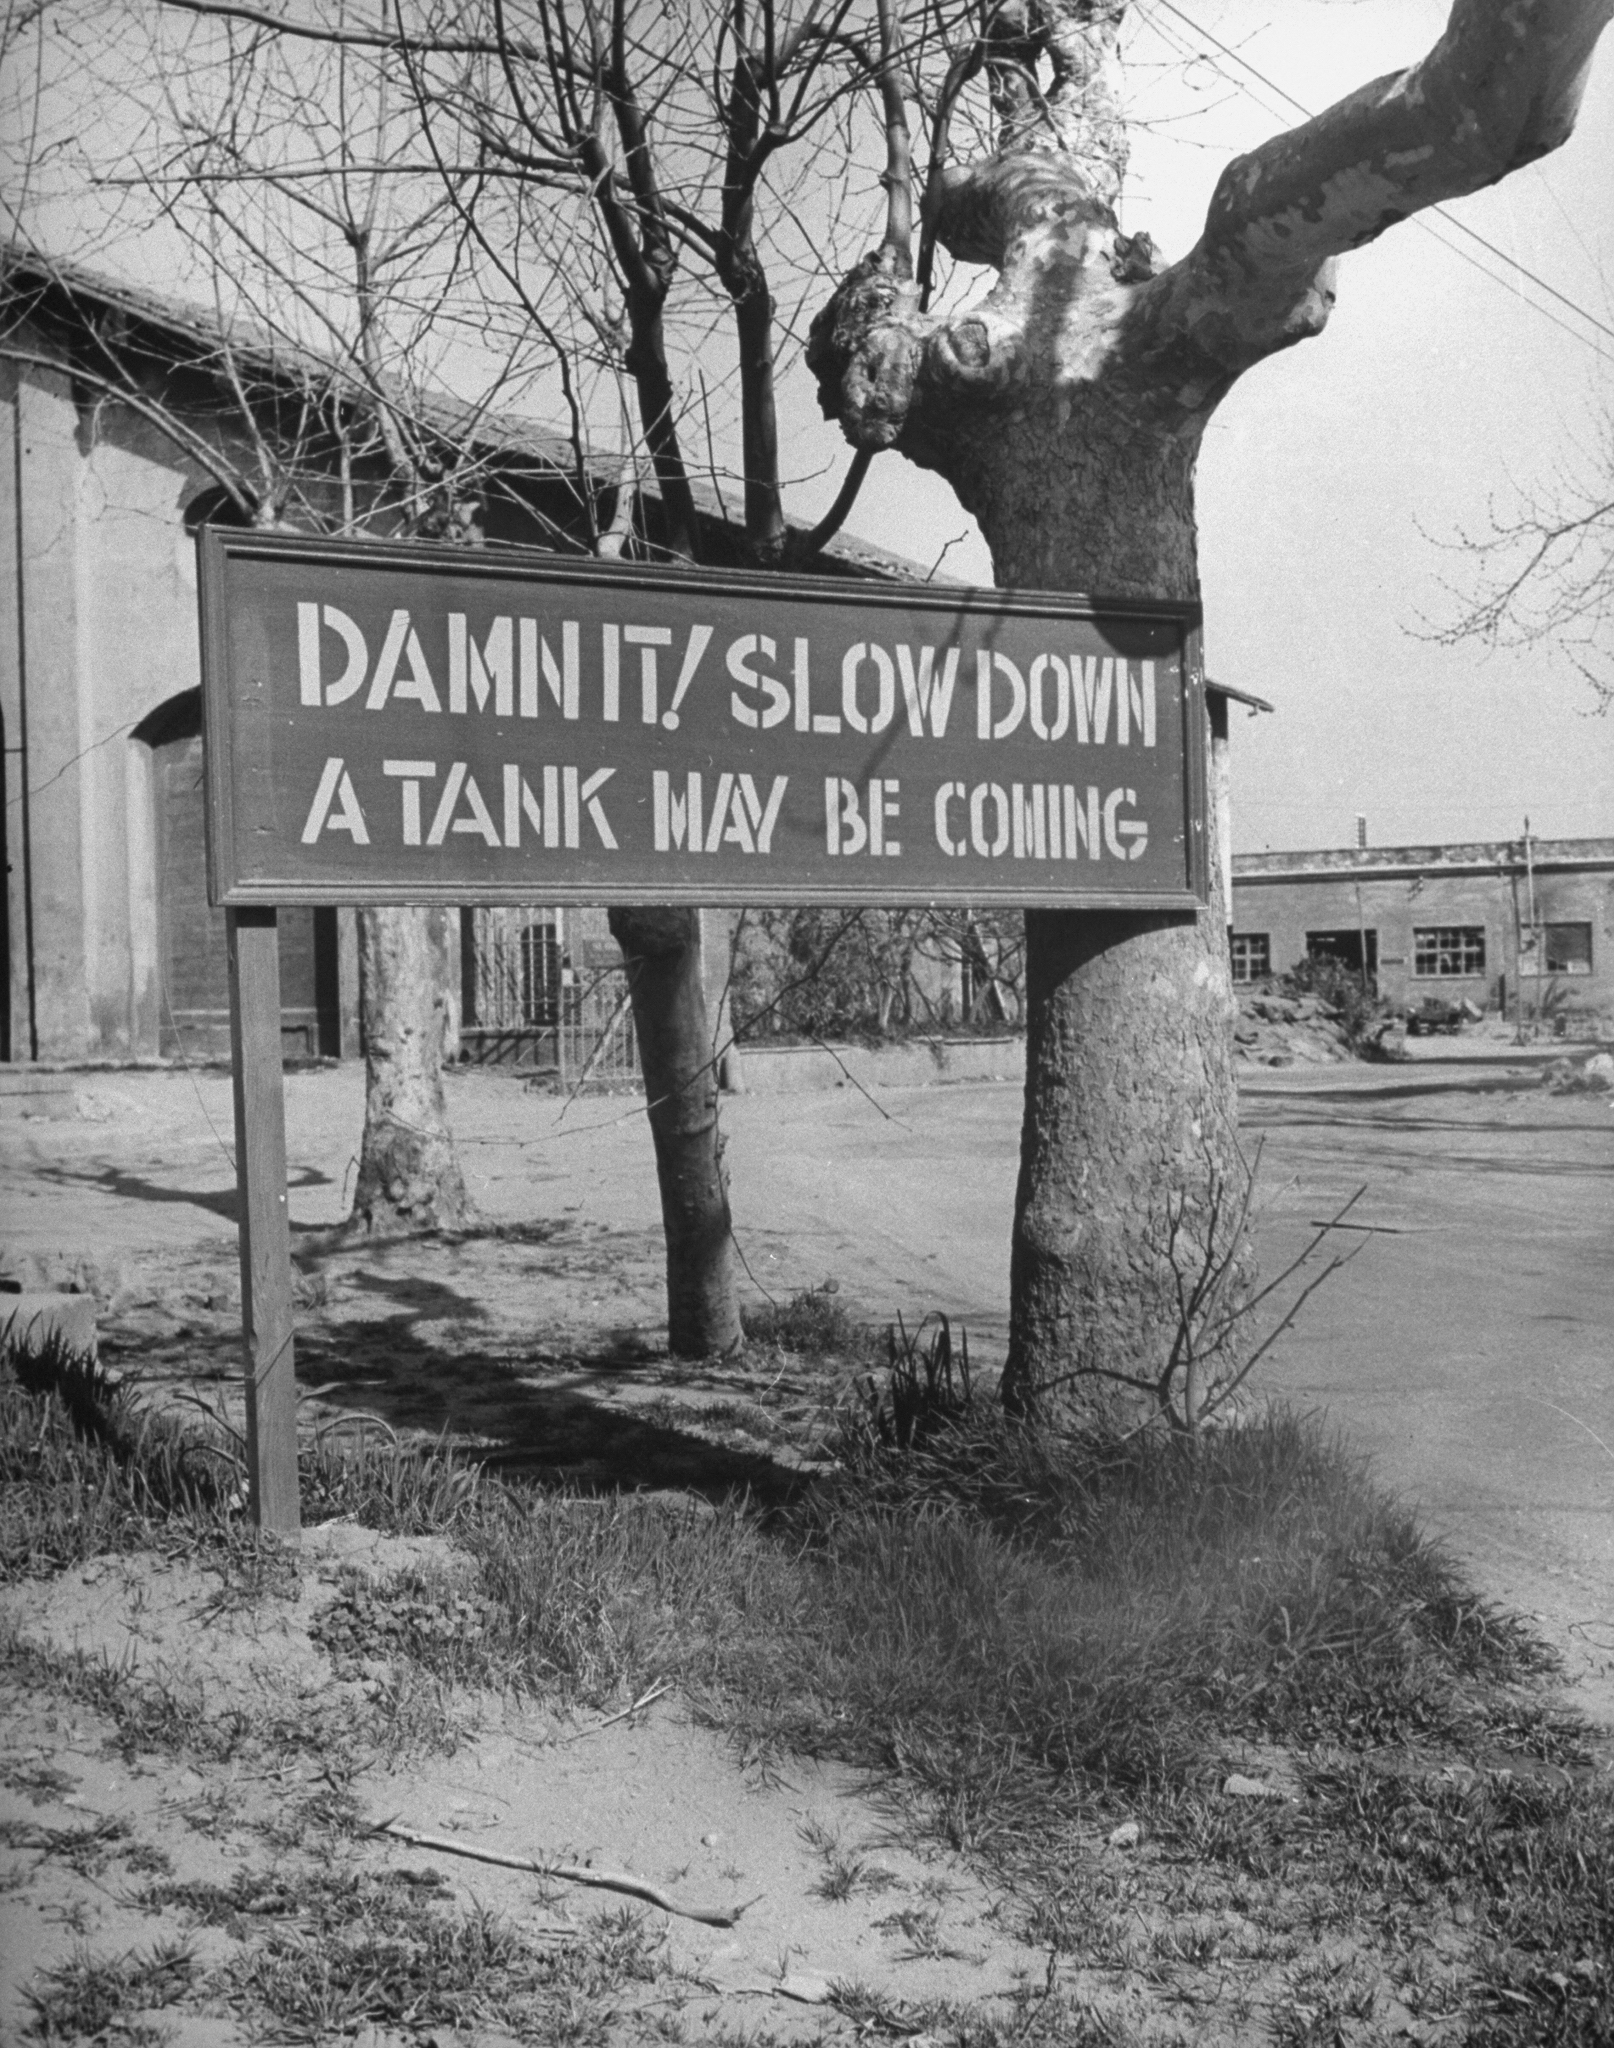 Sign posted at intersection in American sector during the campaign to take the Anzio area from occupying German forces during World War II.